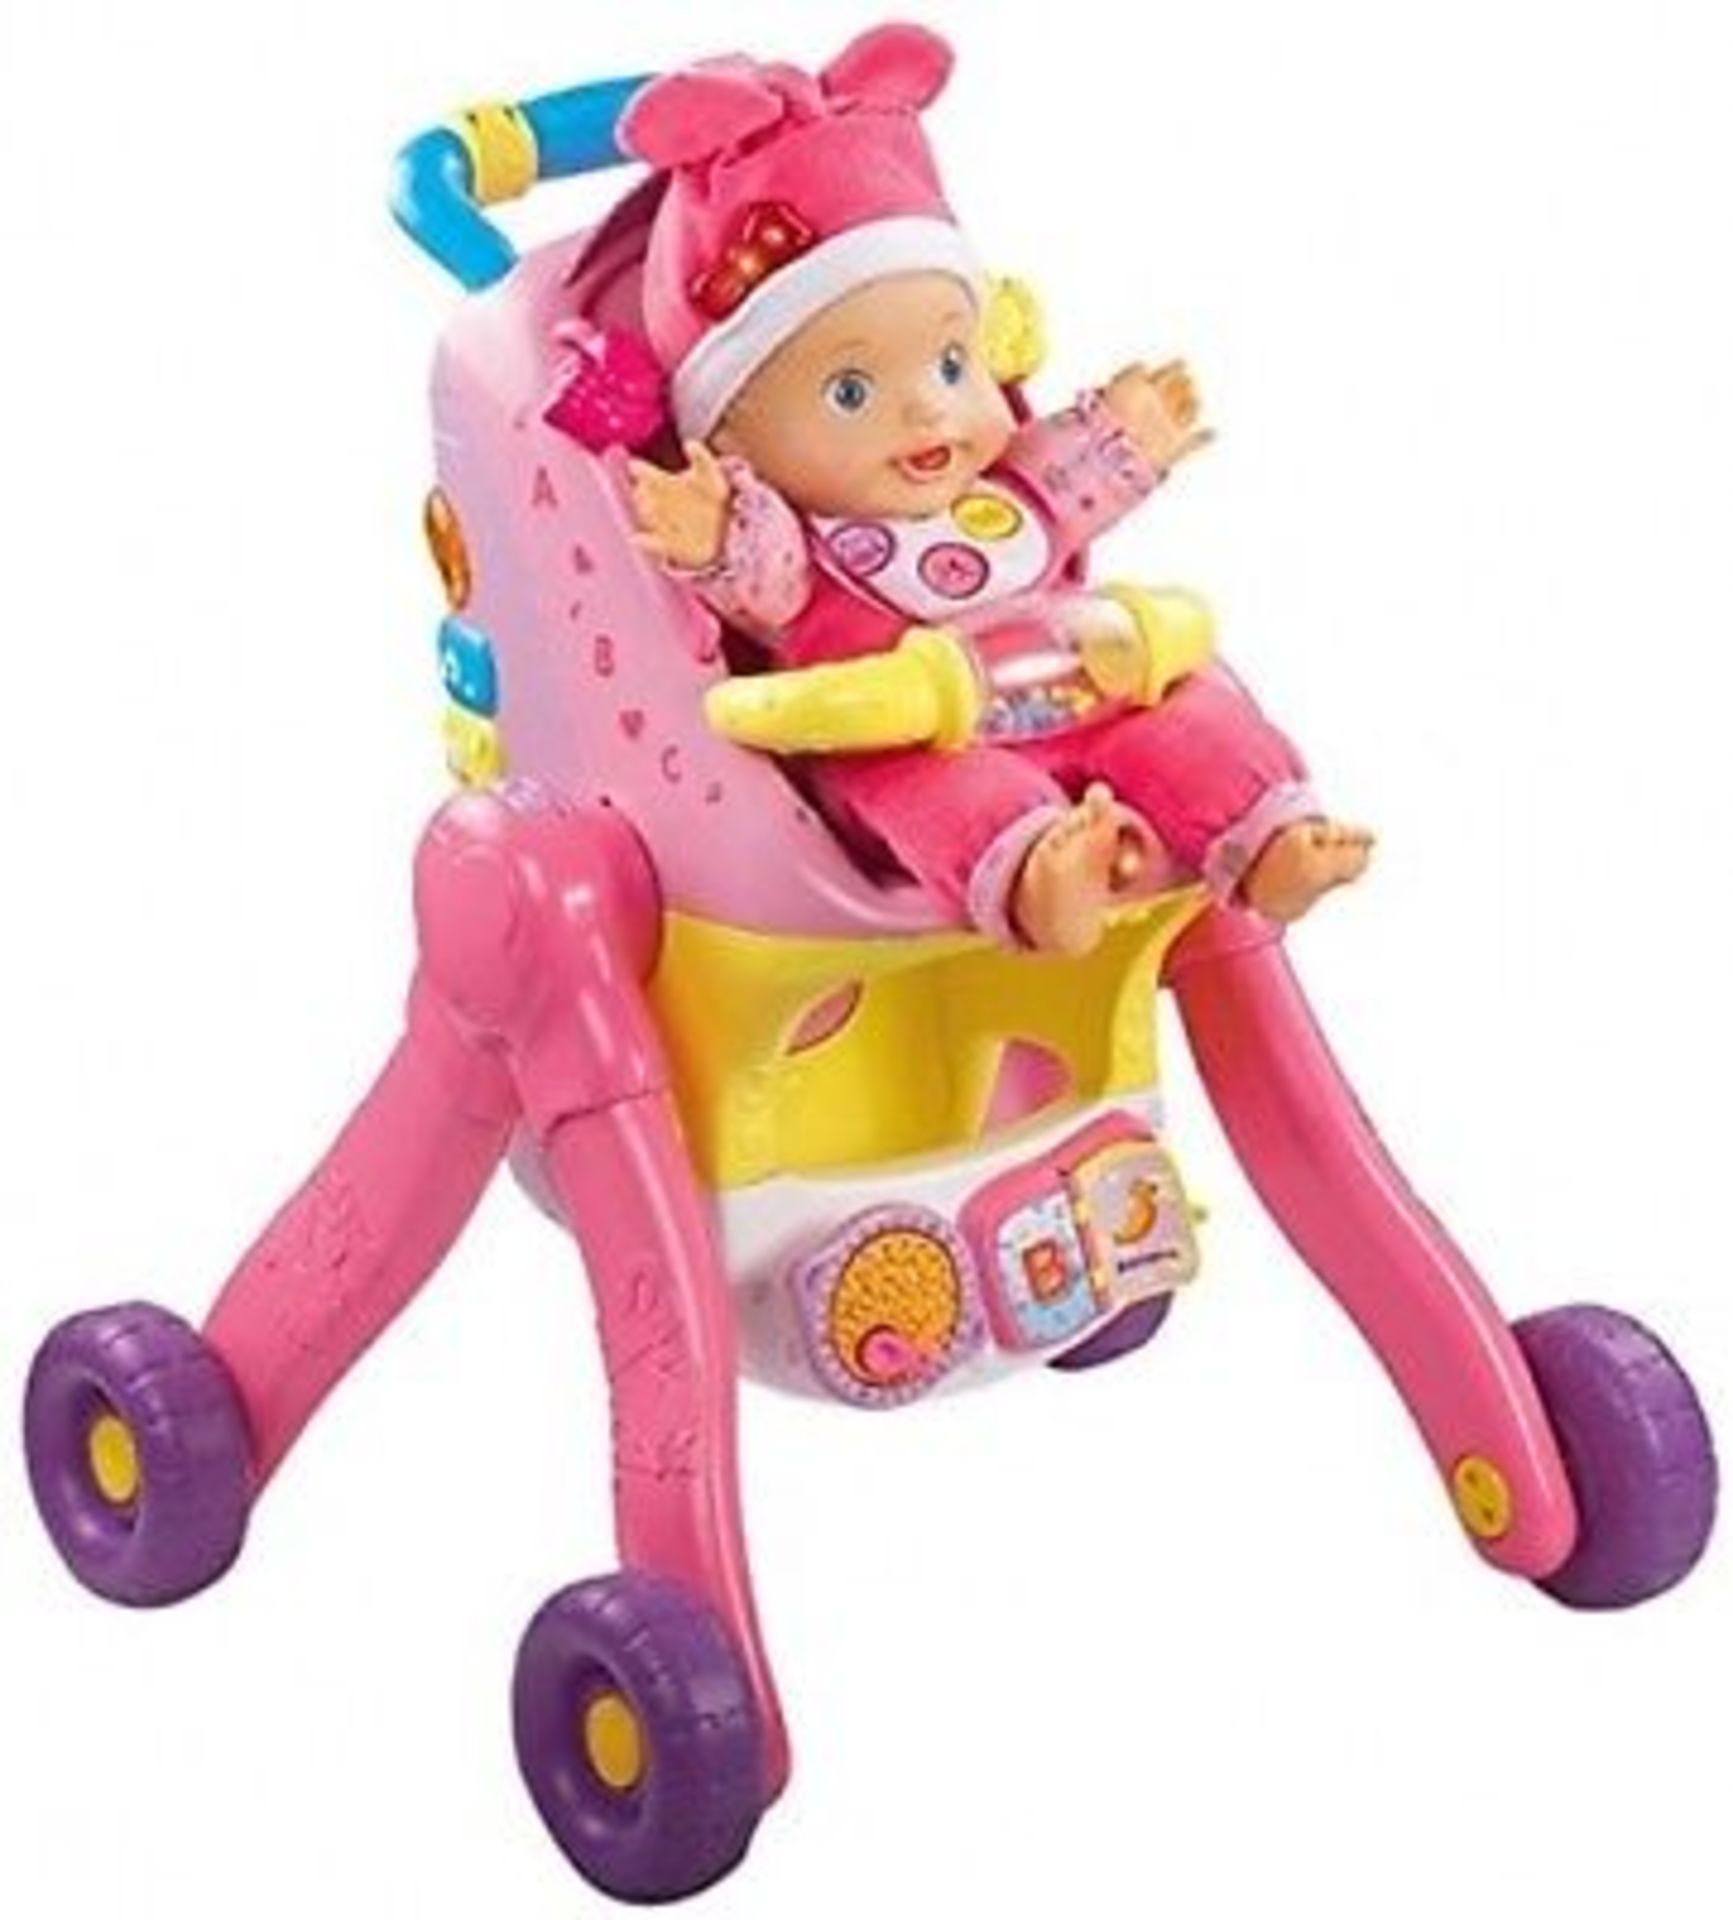 41 x Vtech Little Love 3-in-1 Baby Doll High Pushchair Toy | 3417761541036 | RRP £ 2869.59